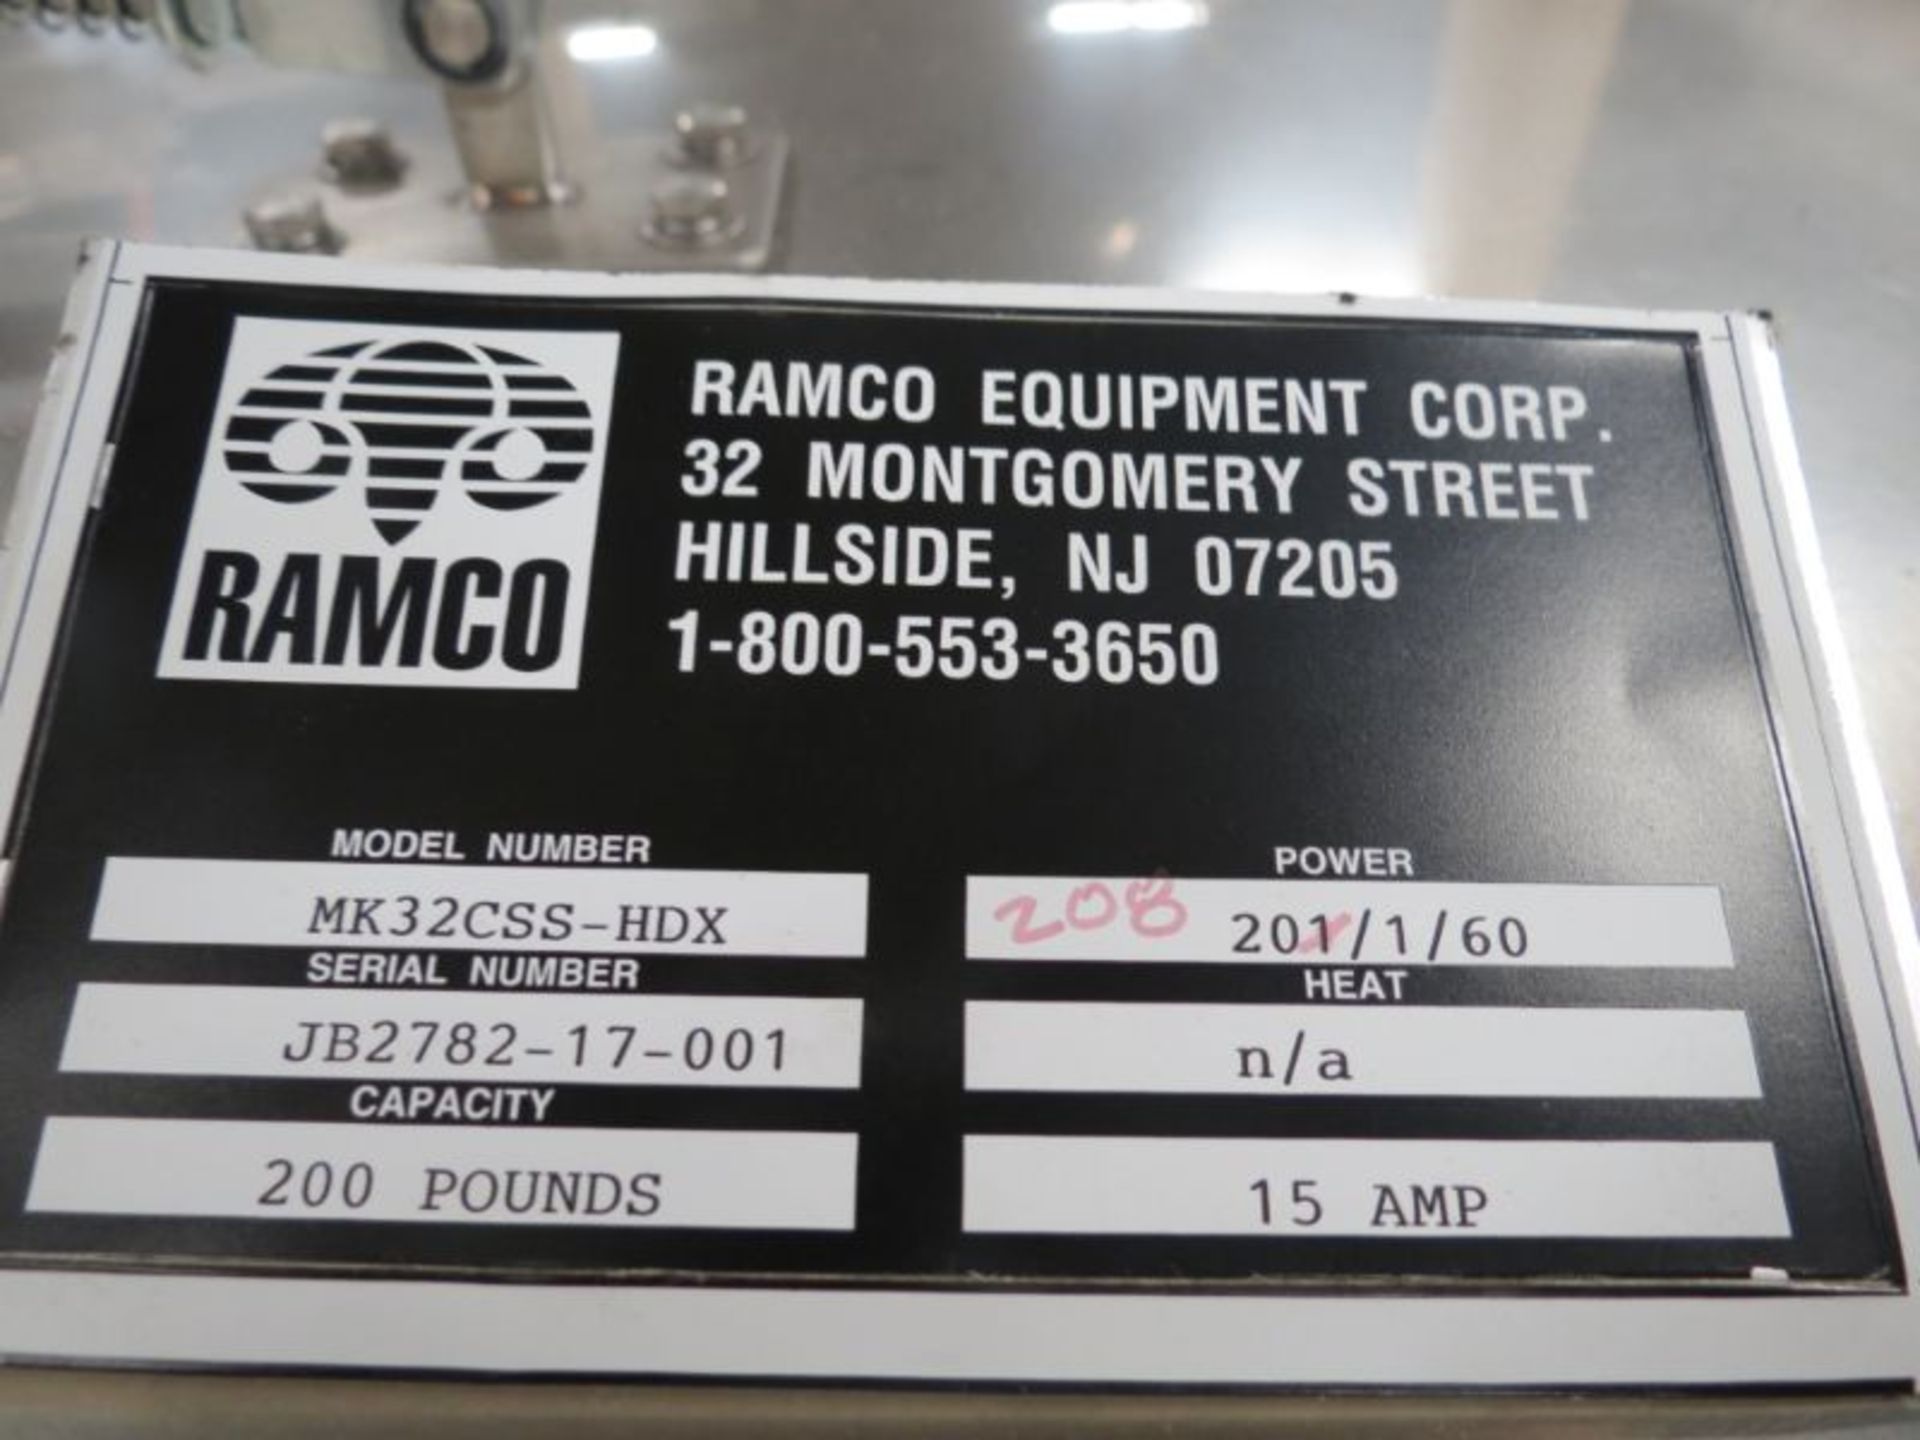 Ramco MK32CSS-HDX Parts Washer, sn: JB2782-17-001, *Brand New, Replacement Cost $55,000* - Image 16 of 16